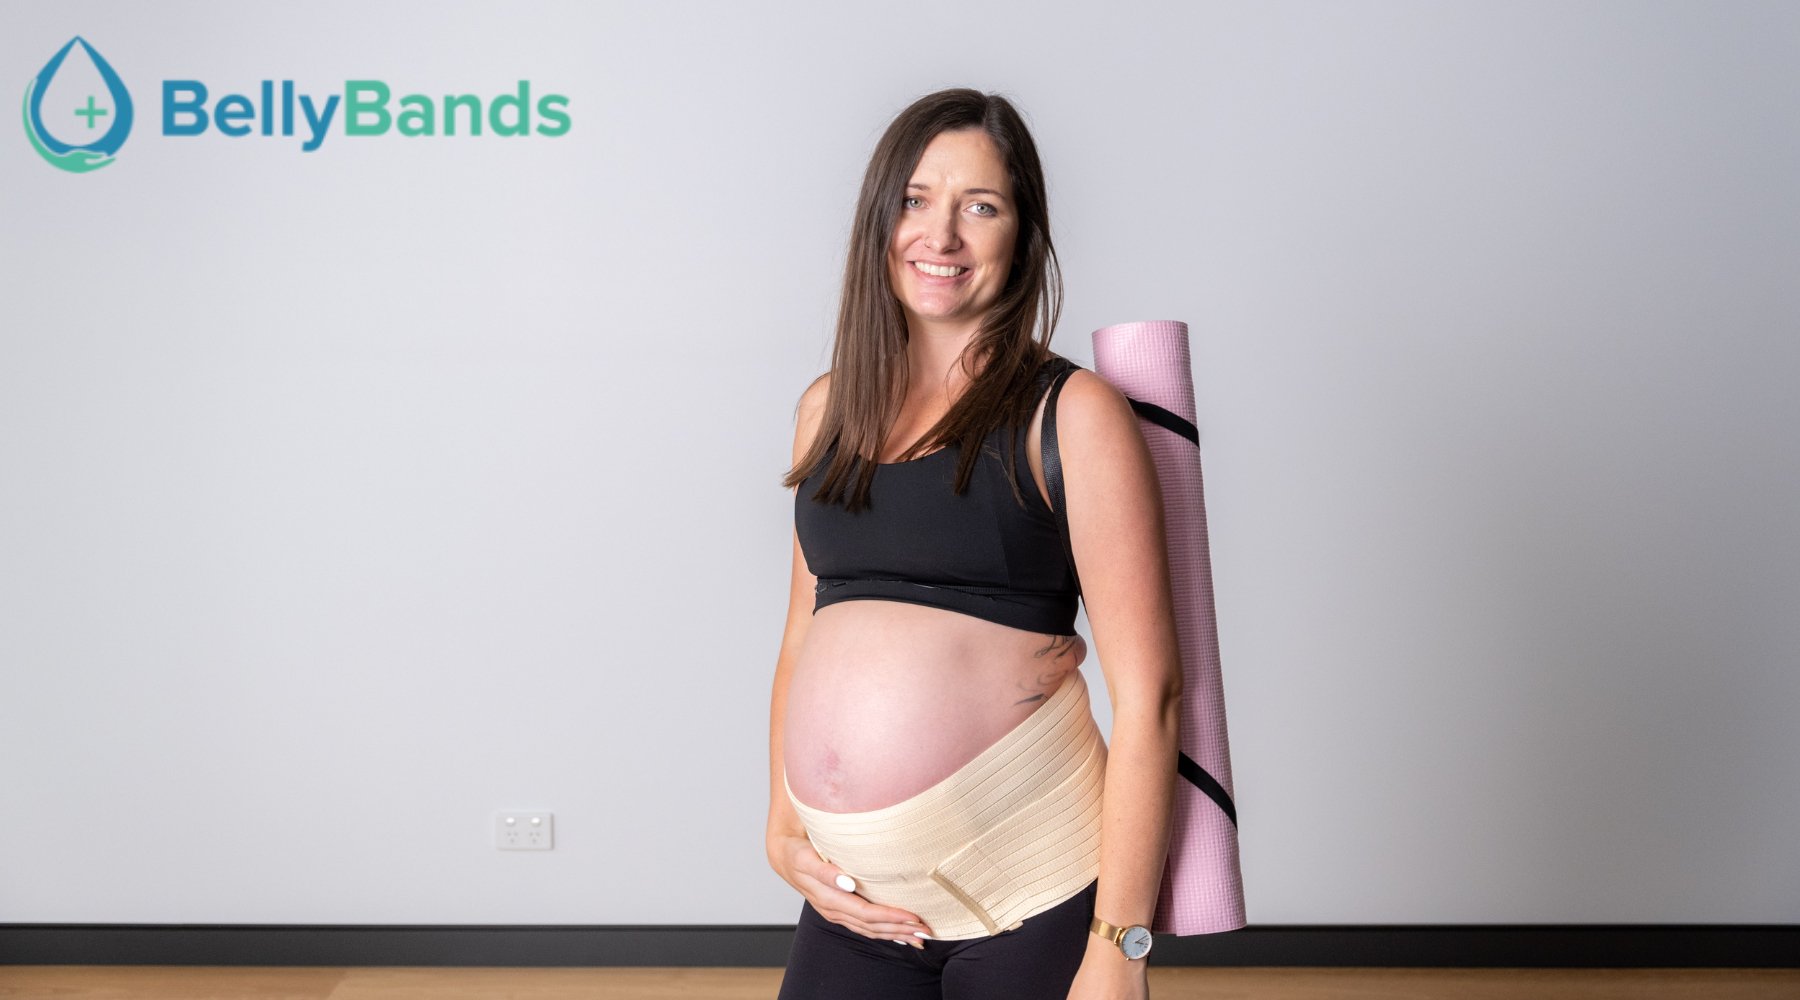 Pregnancy Workout App — Expecting & Empowered